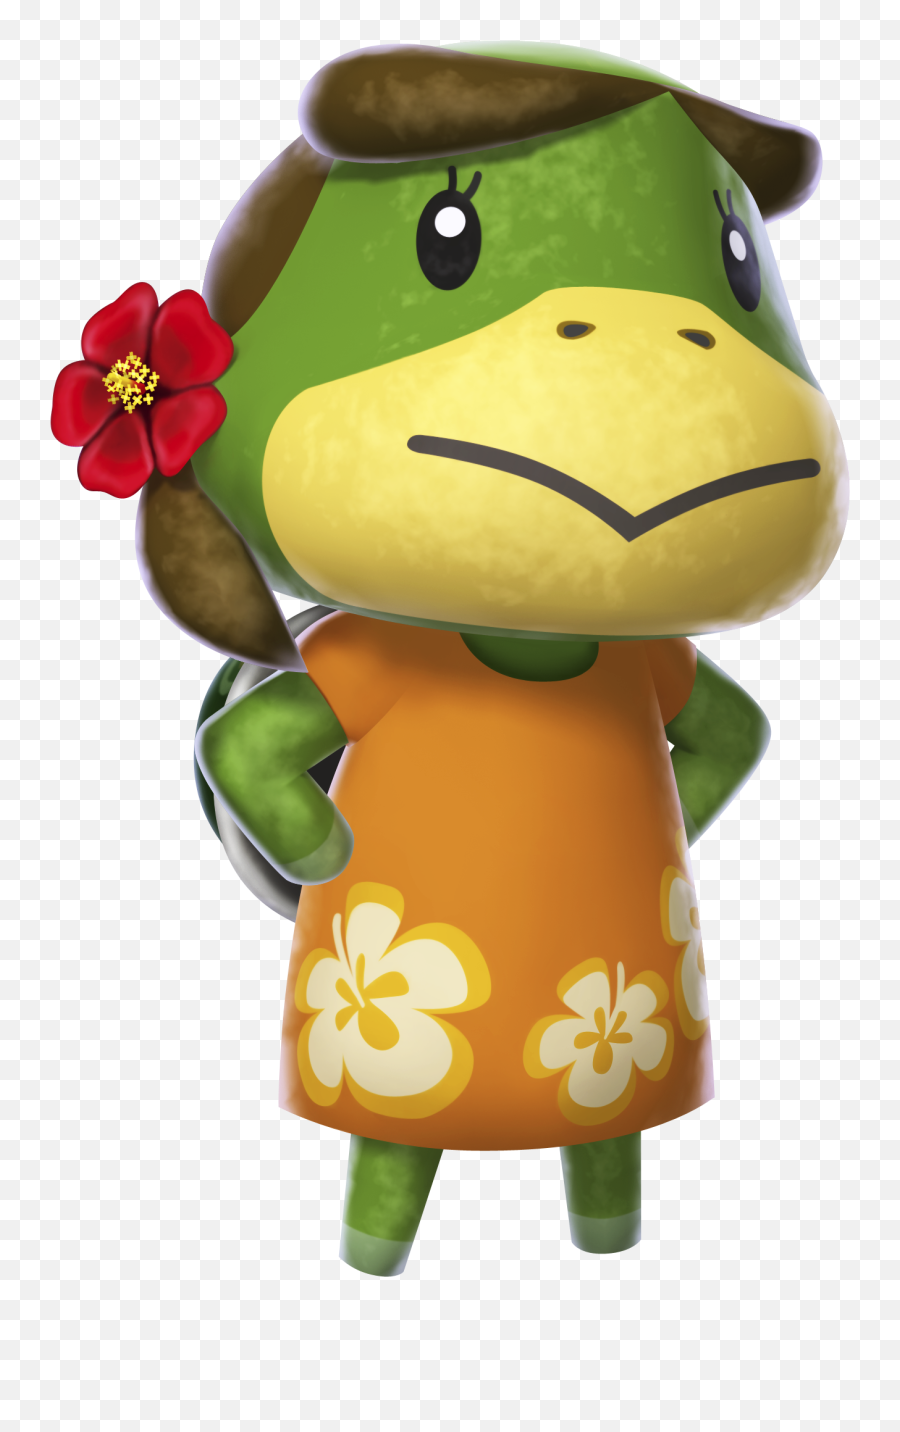 New Leaf Characters - Insel Animal Crossing New Leaf Emoji,Animal Crossing New Leaf How To Delete An Emotion